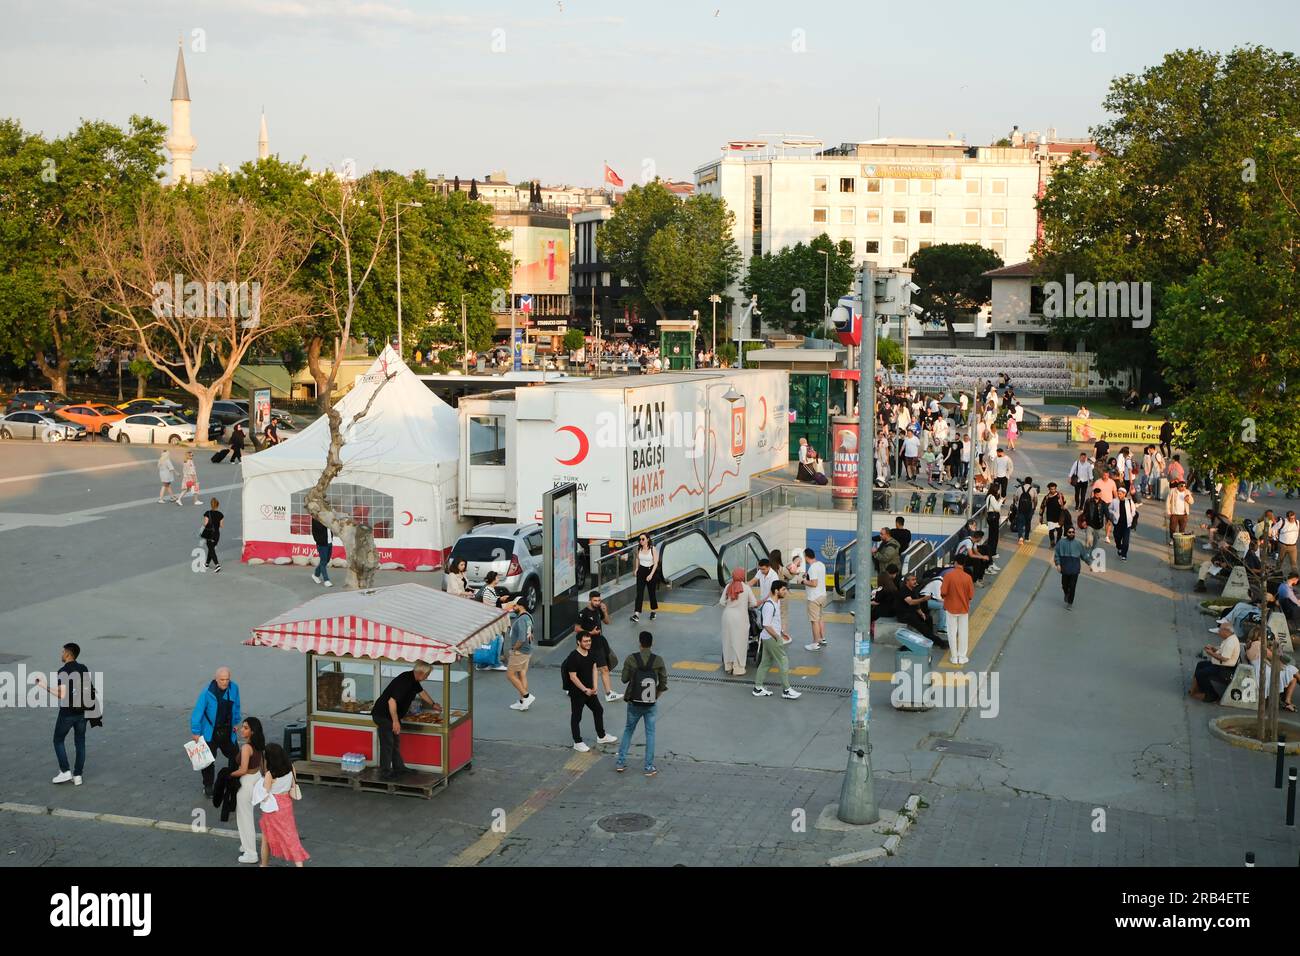 Istanbul, Turkey - June 19, 2023: The operation field of The Turkish Red Crescent (Turk Kizilay) was parked in Kadikoy Square on a summer day and wait Stock Photo